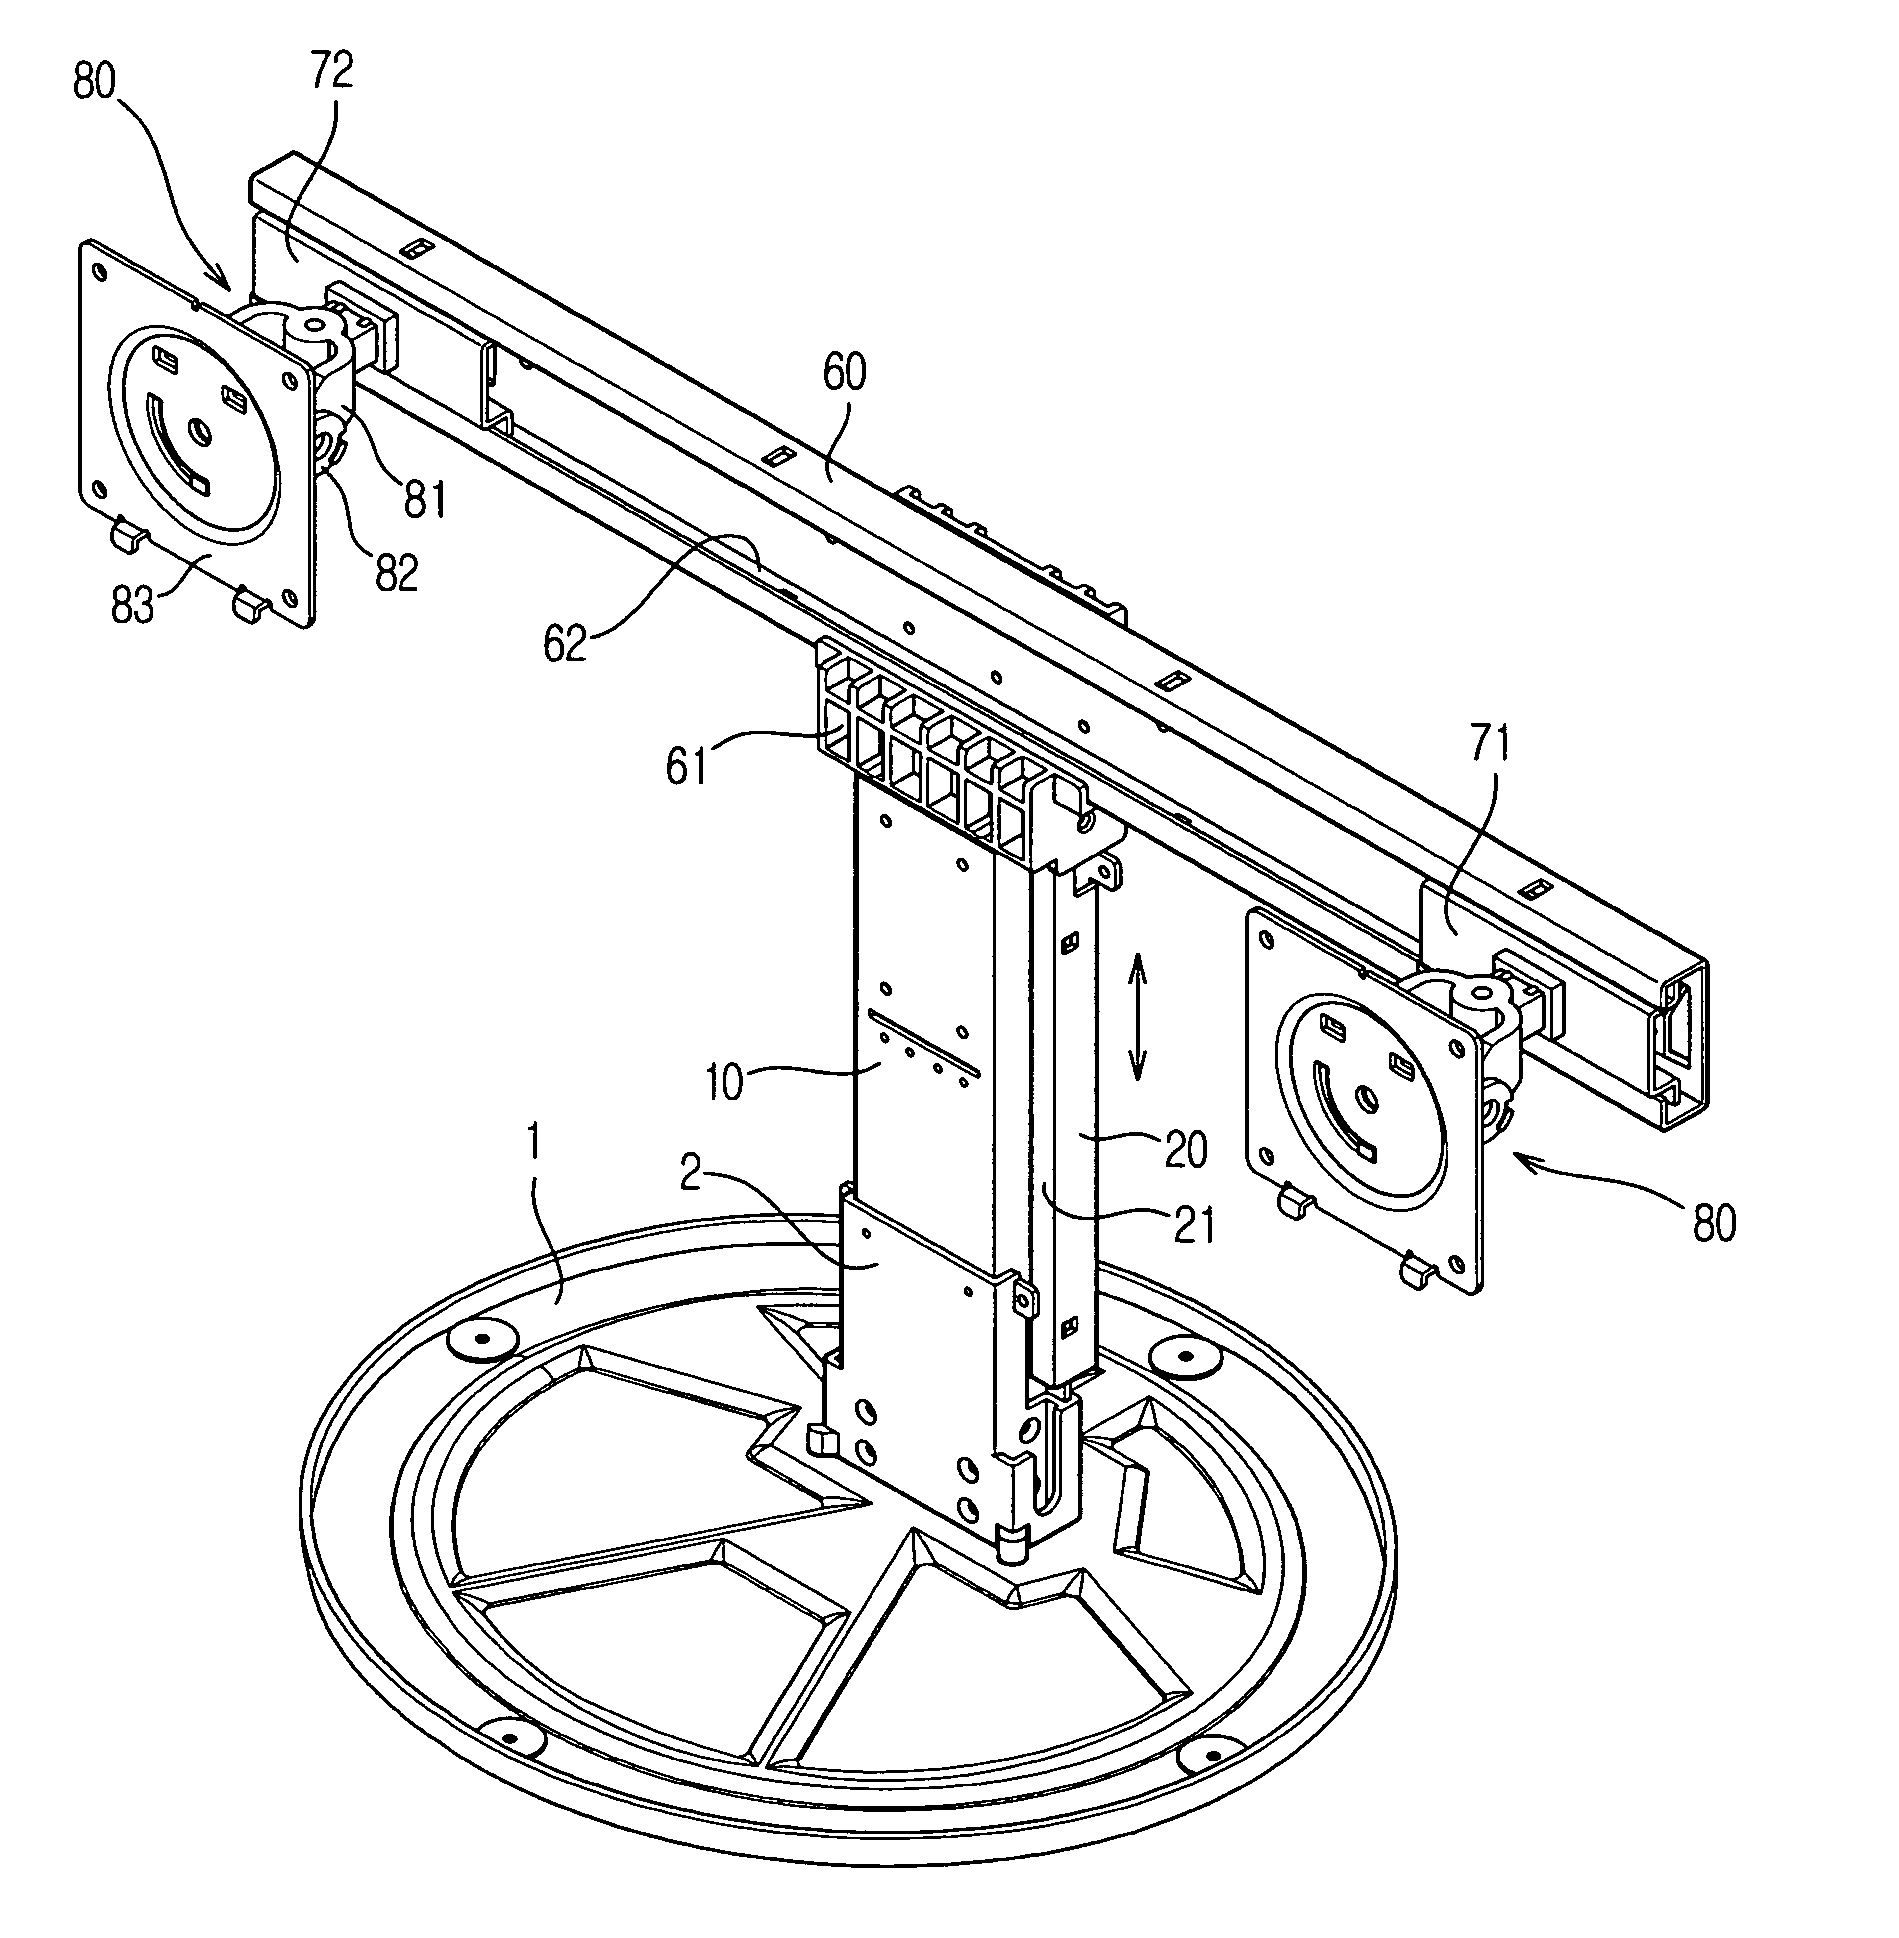 Supporting device for display units